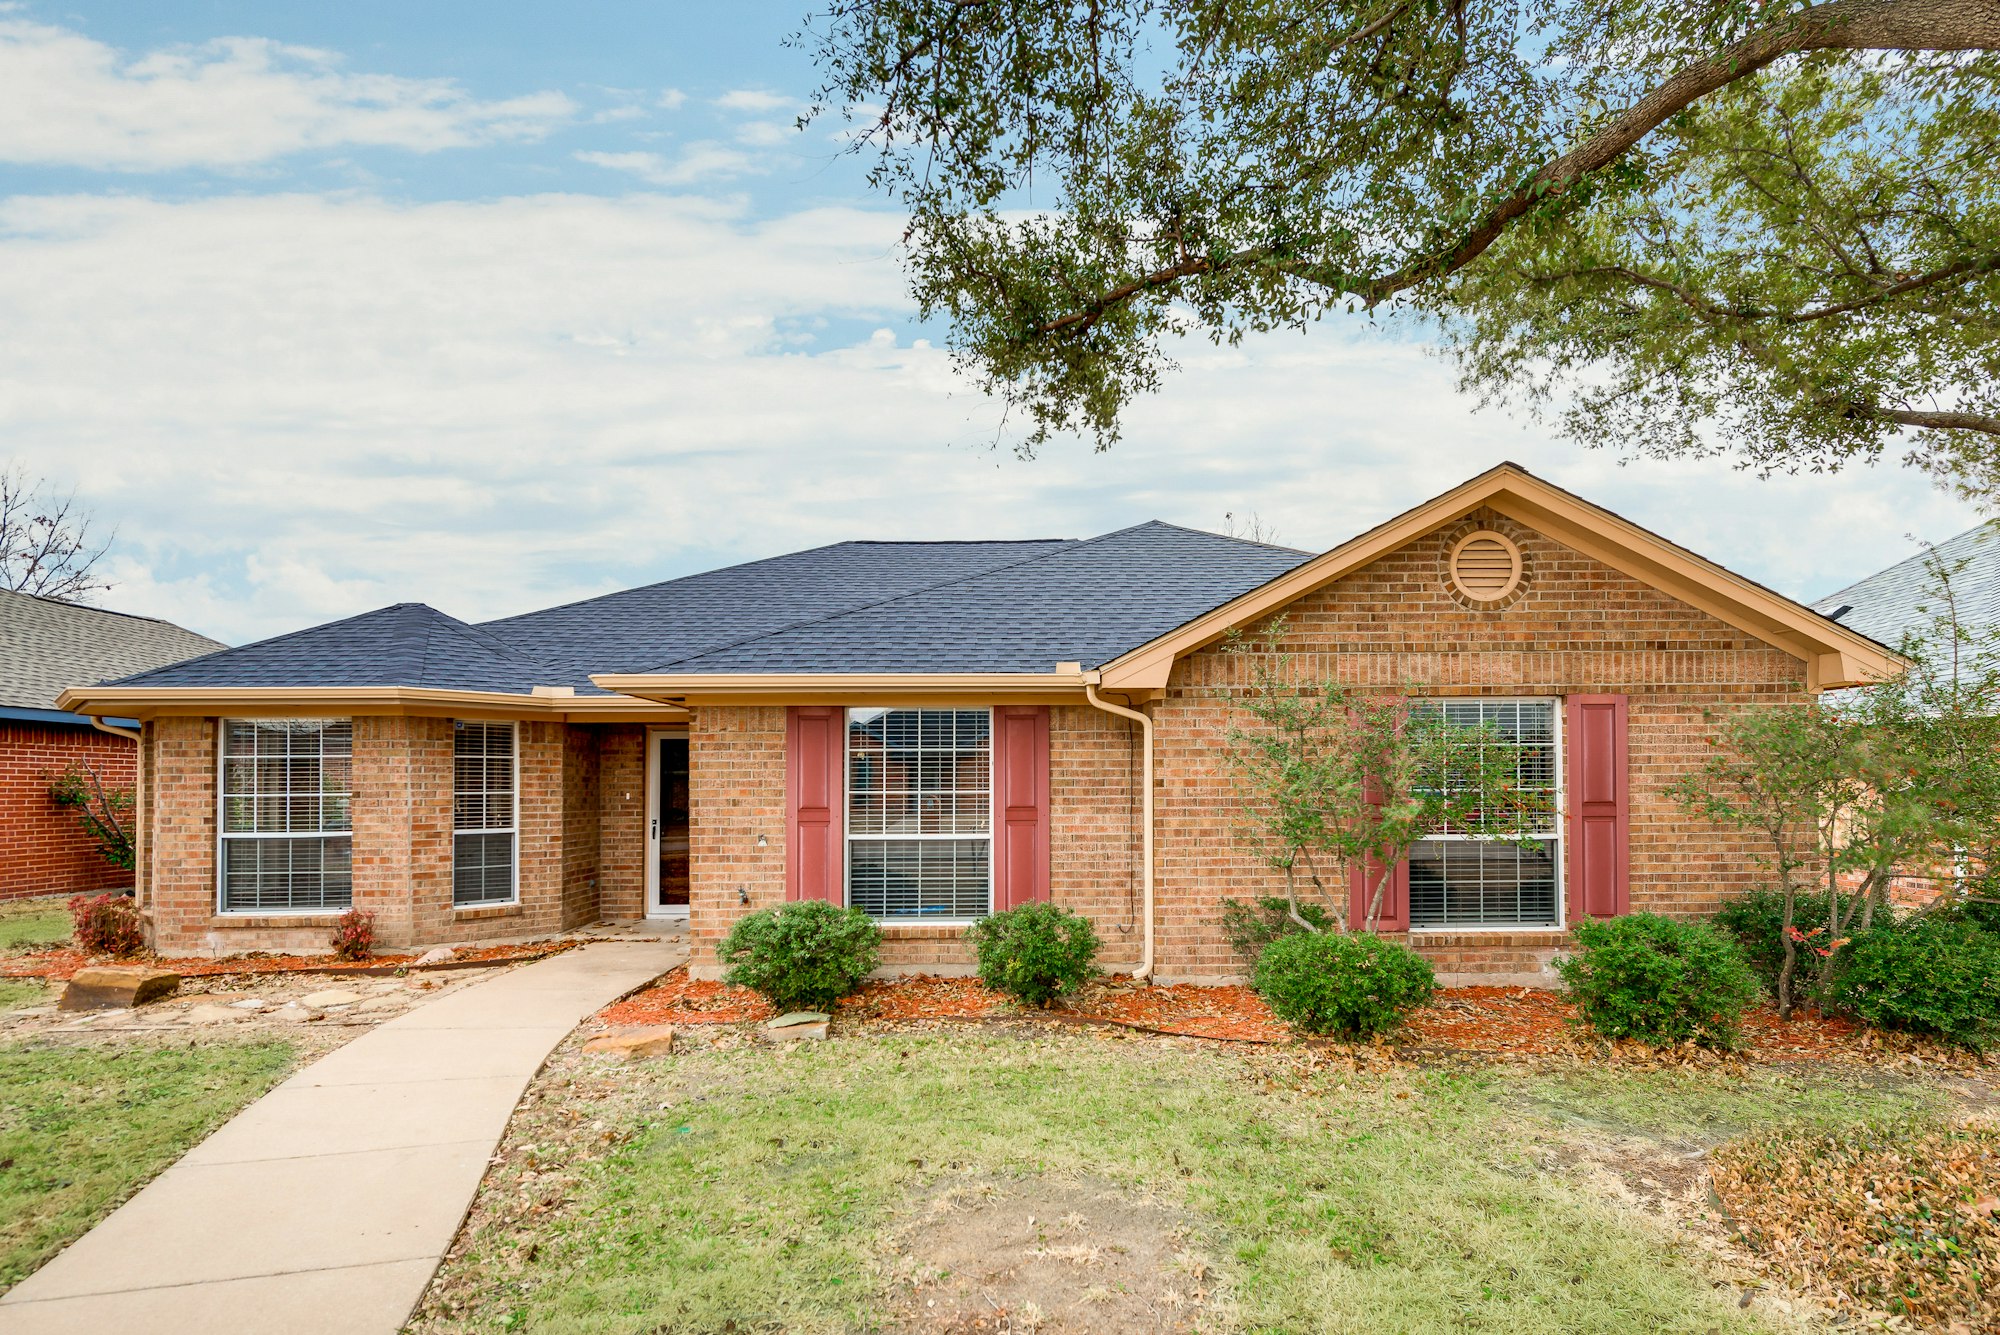 Photo 1 of 19 - 416 Kylie Ln, Wylie, TX 75098